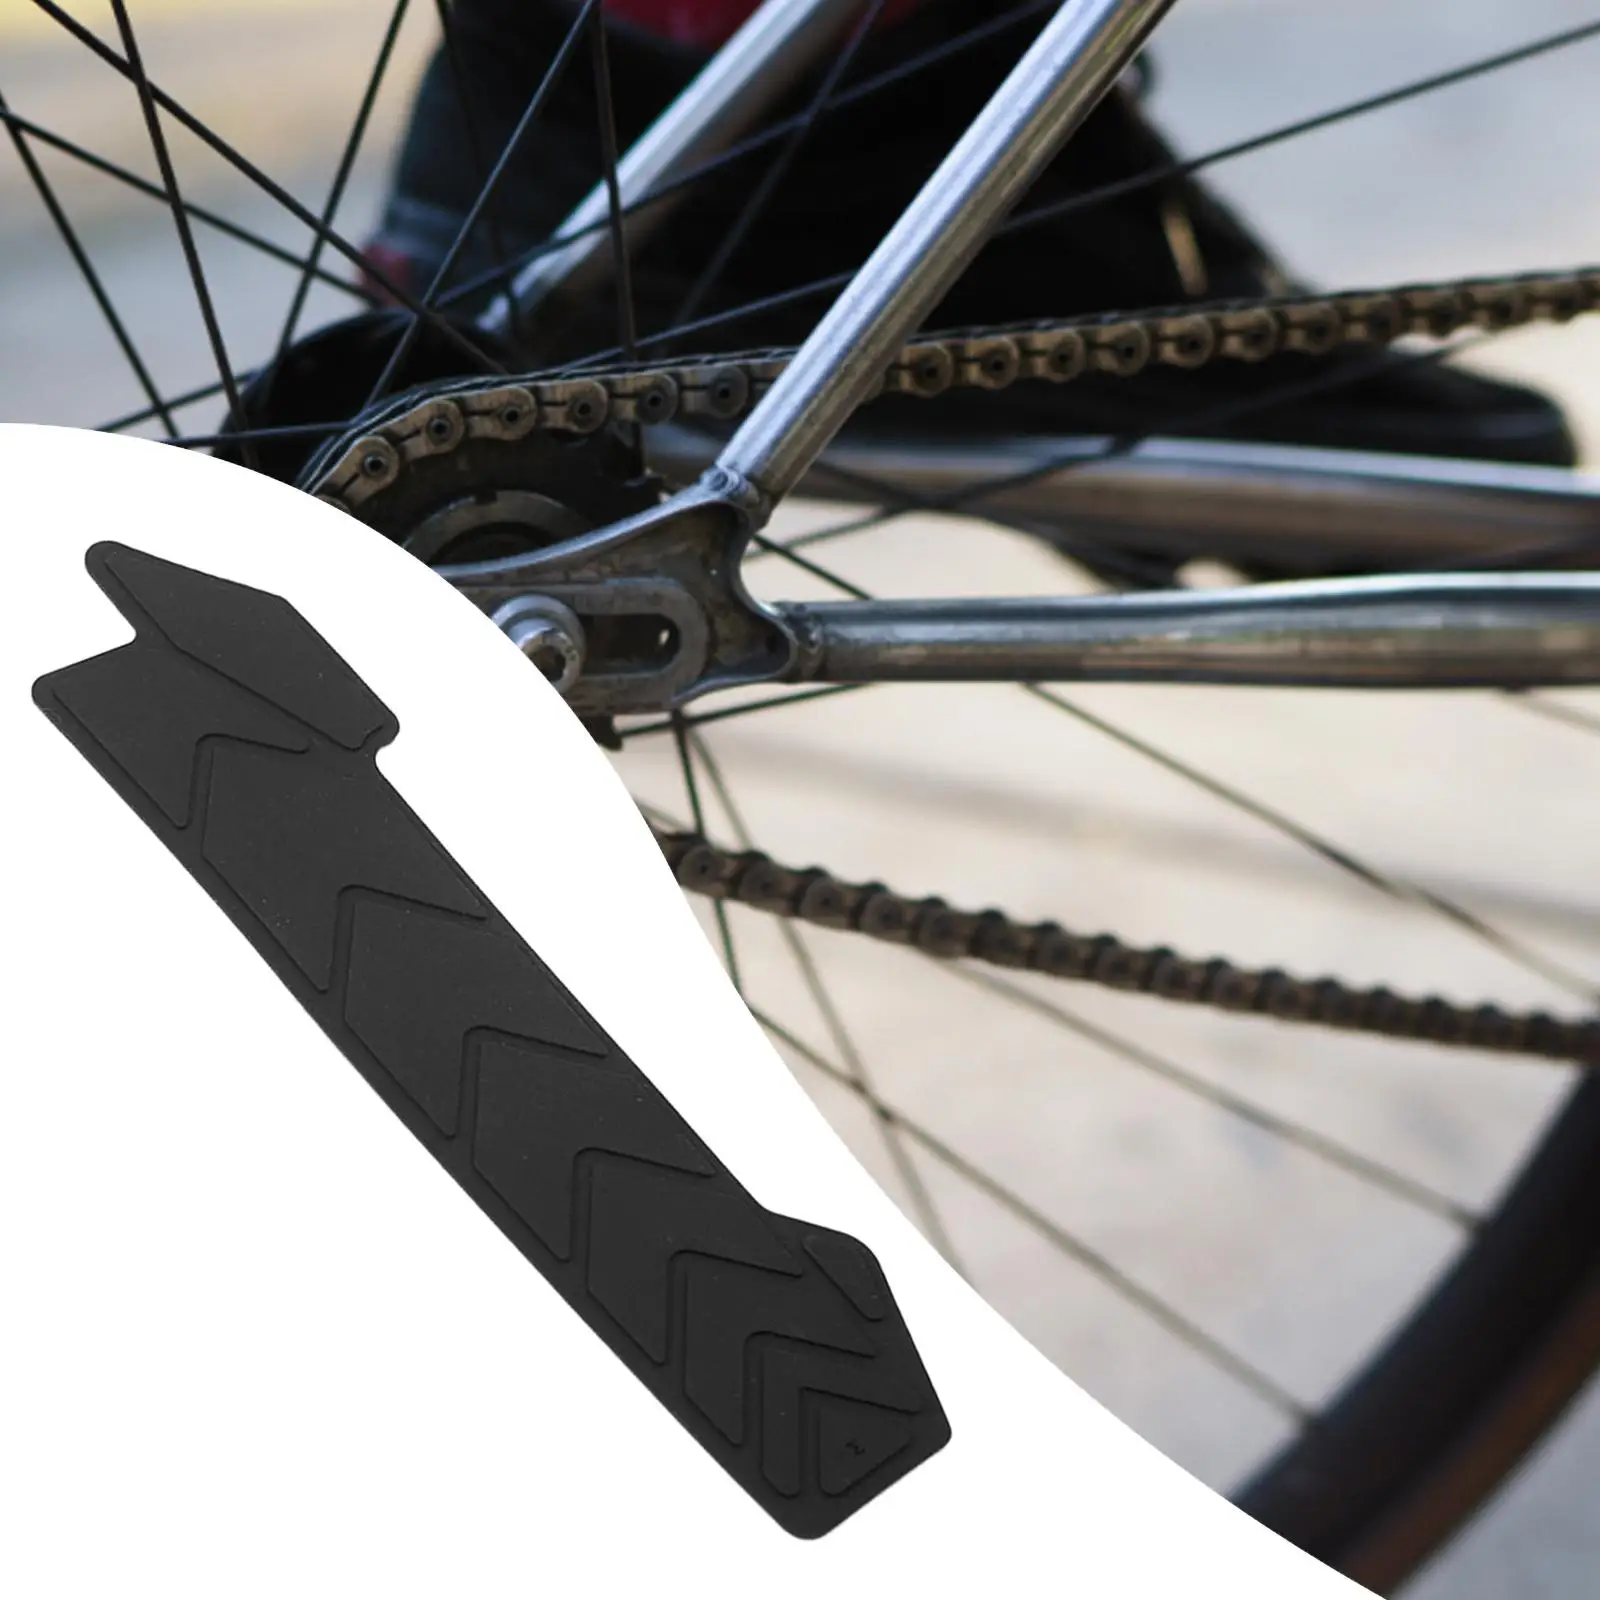 Bike Chainstay Protector Chain Pad Bicycle Frame Sticker Guard Pad for Road Bike